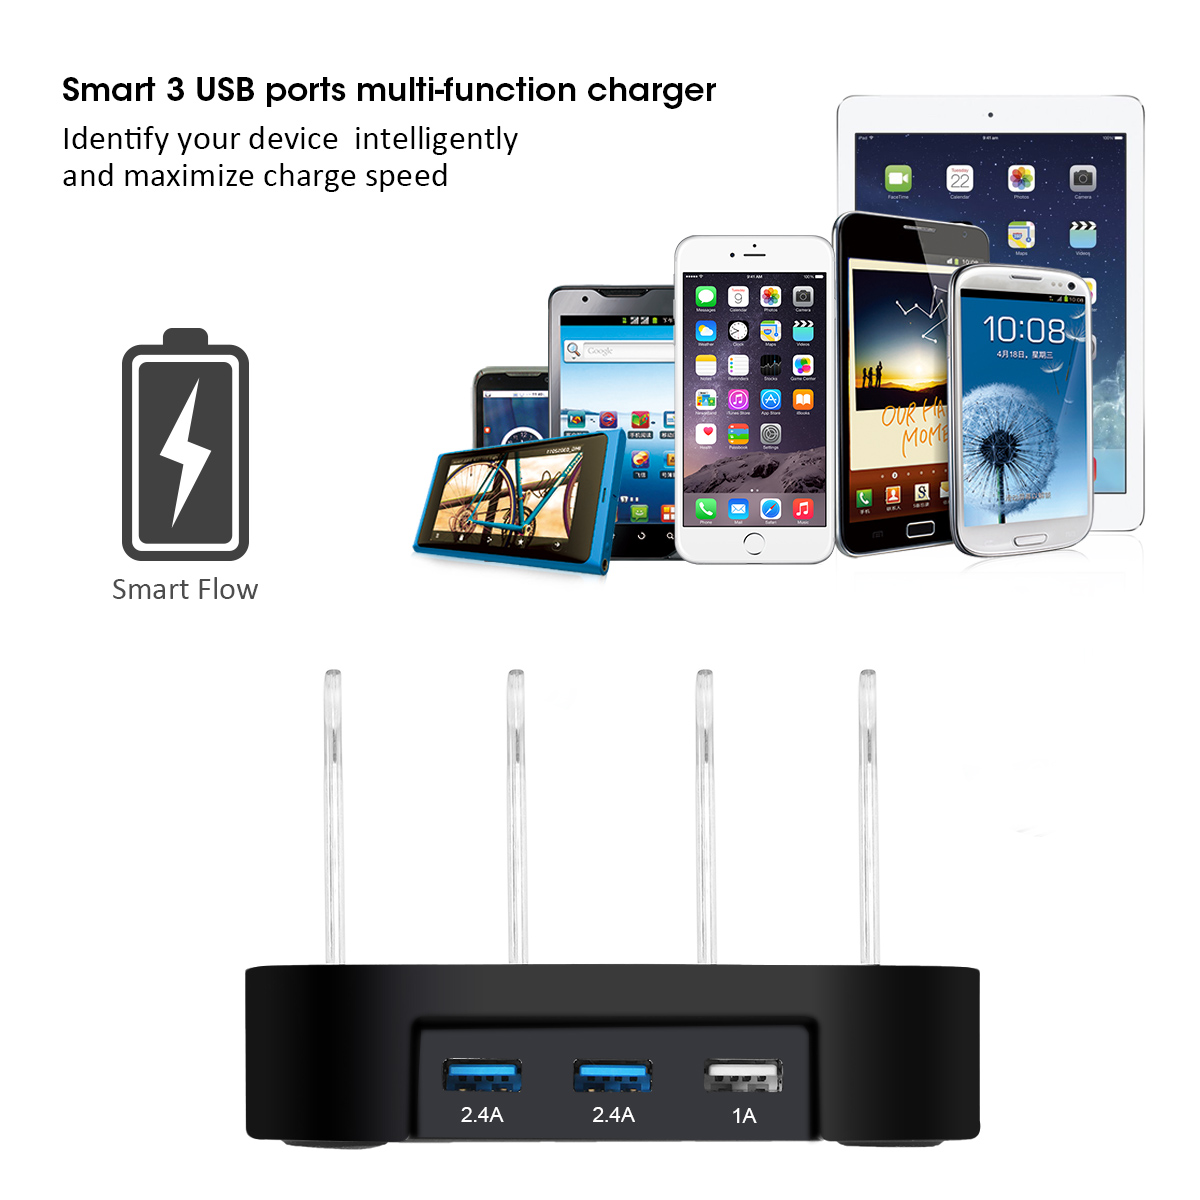 Multifunctional 3 USB-Port Universal Smart Charger Charging Dock for Mobile Phone